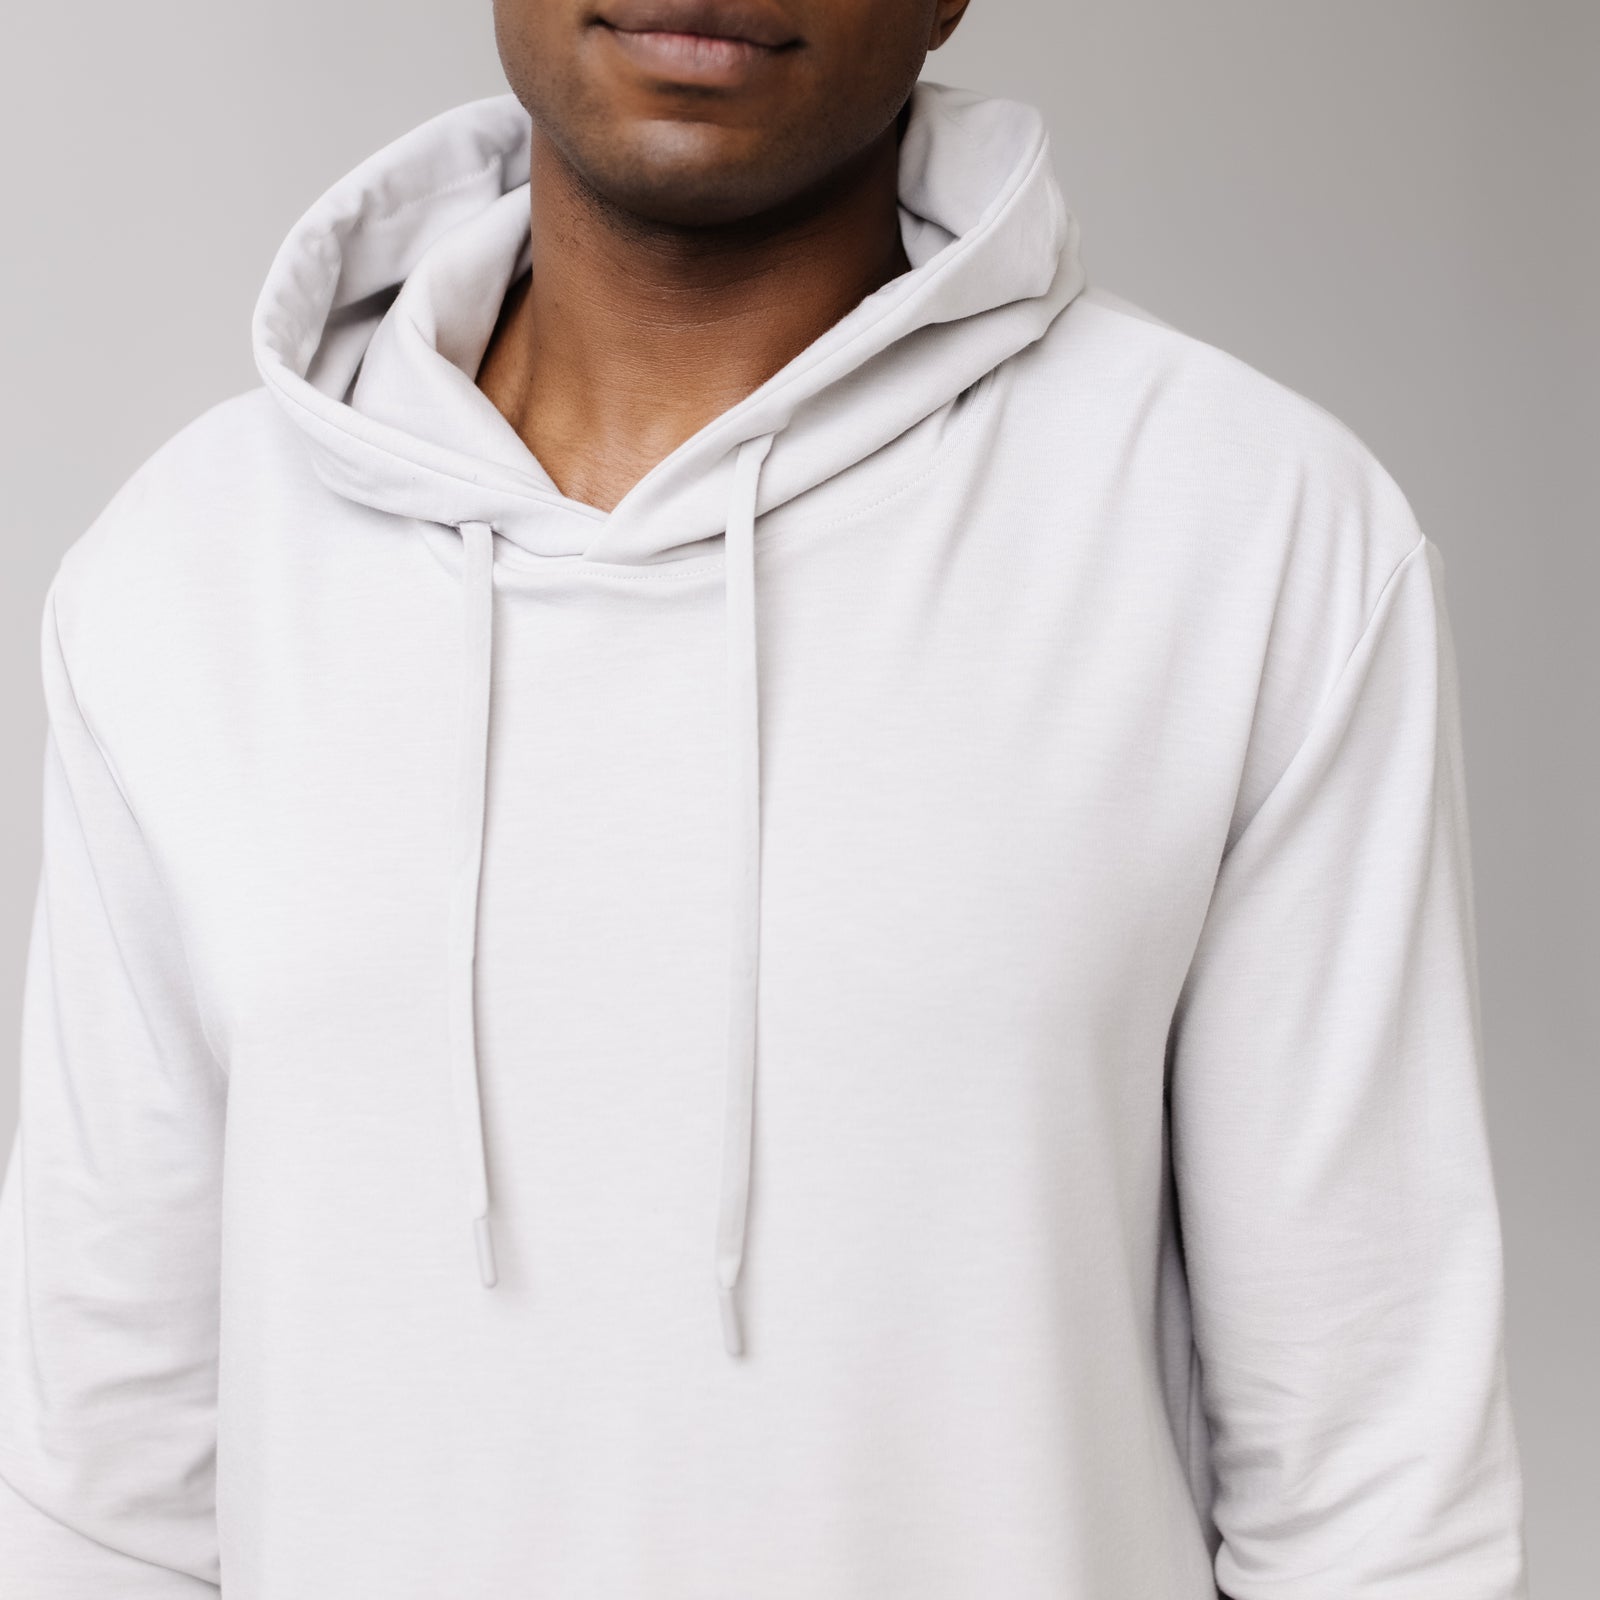 Light Grey Bamboo Hoodie worn by a man standing in front of white background.